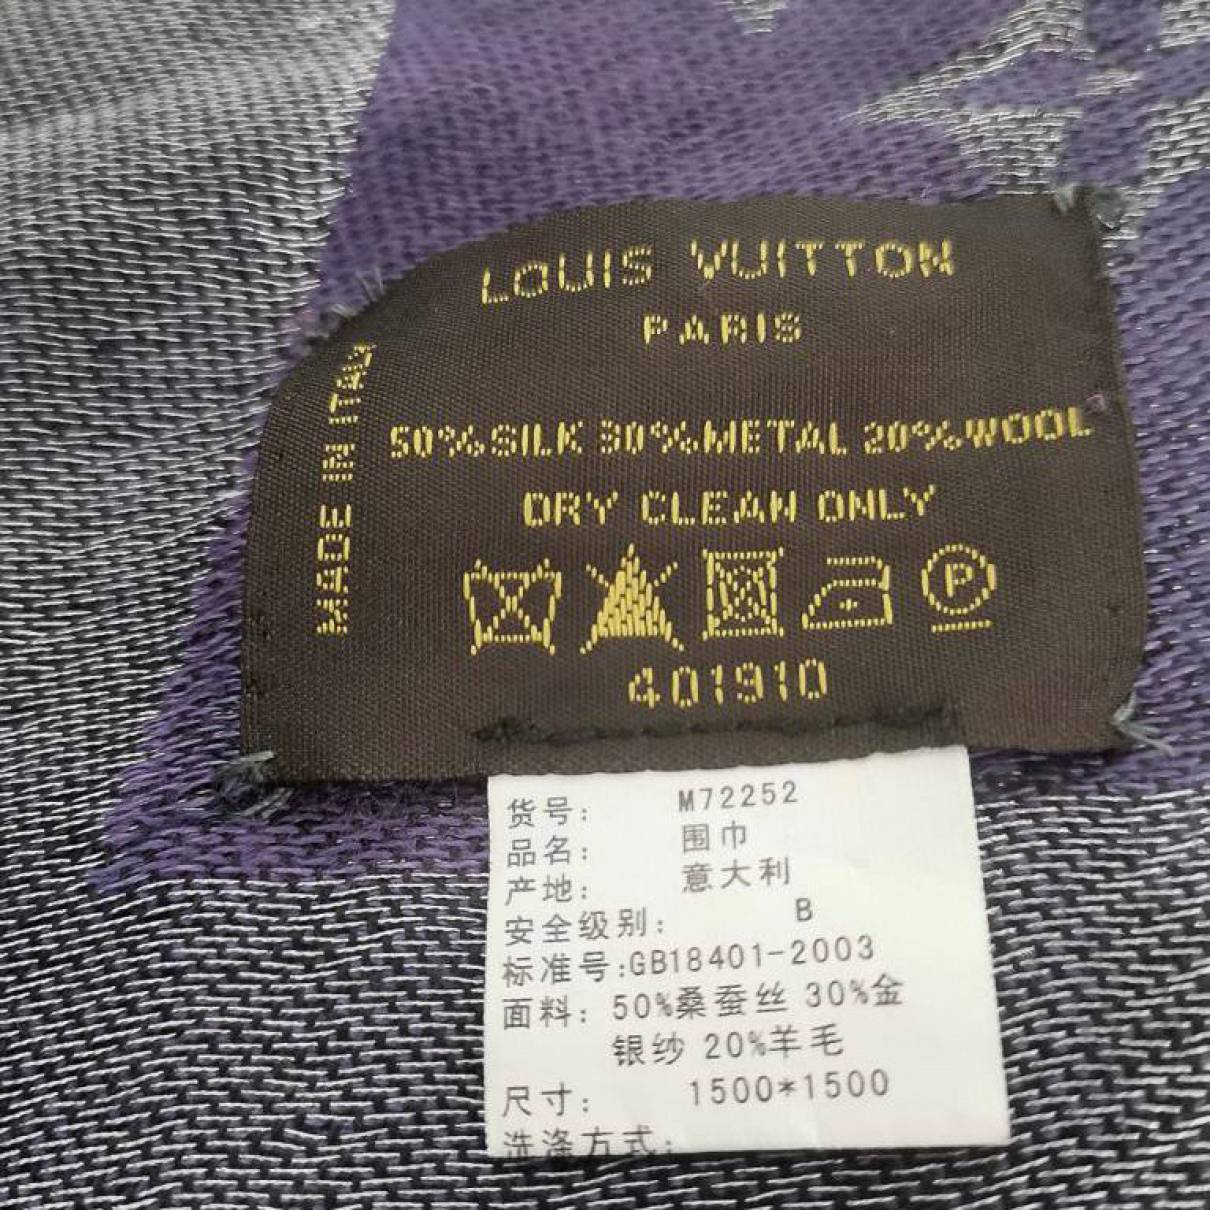 Louis Vuitton Lv woman scarf beige with silver logo  Echarpe louis vuitton,  Tenue écharpe, Écharpe lv